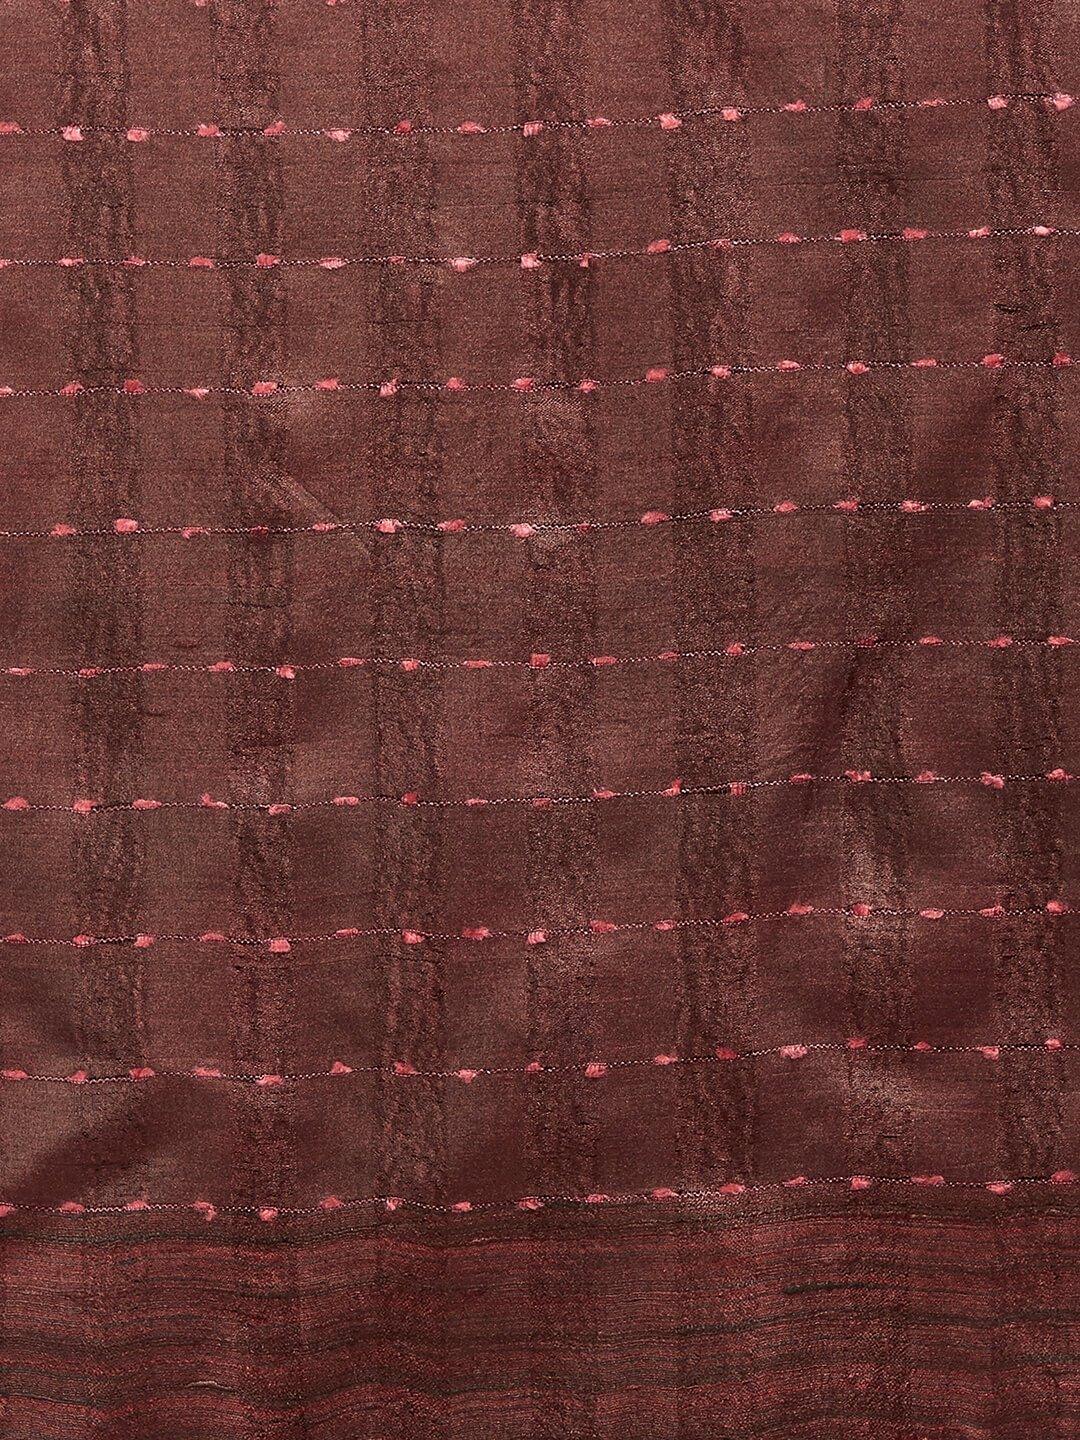 CraftsCollection.in -Maroon Tussar Silk Stole